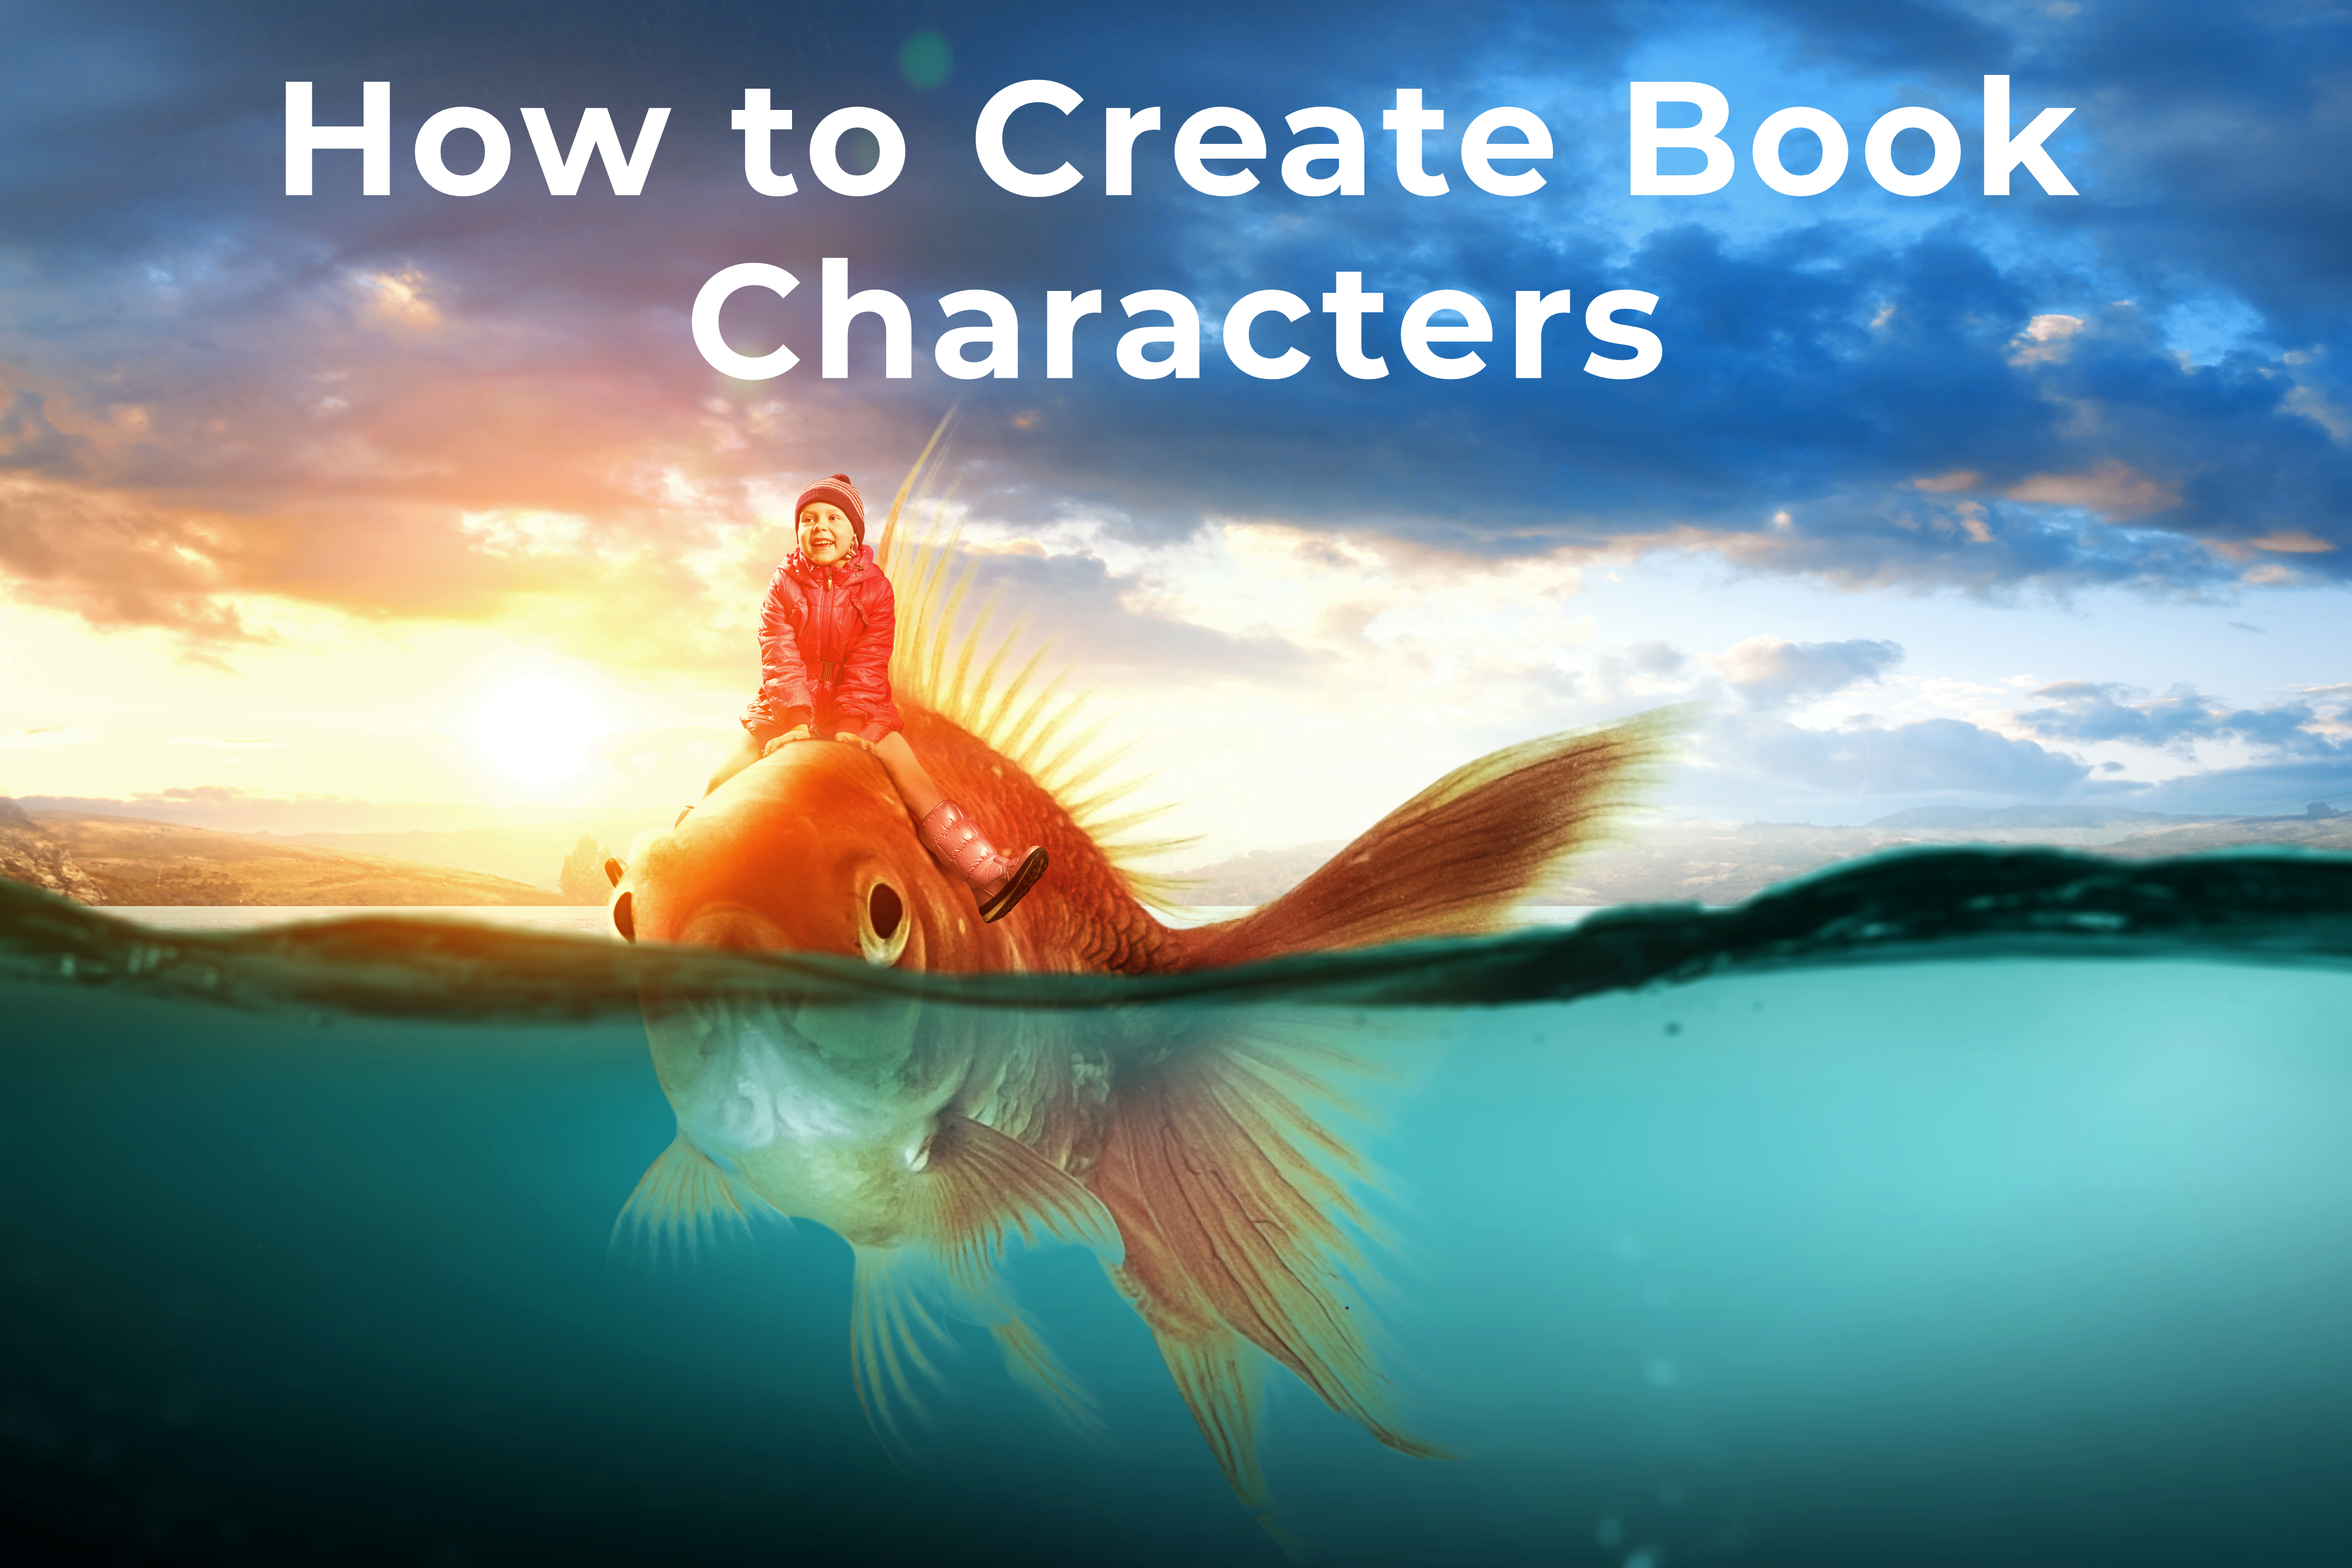 How to Create Book Characters